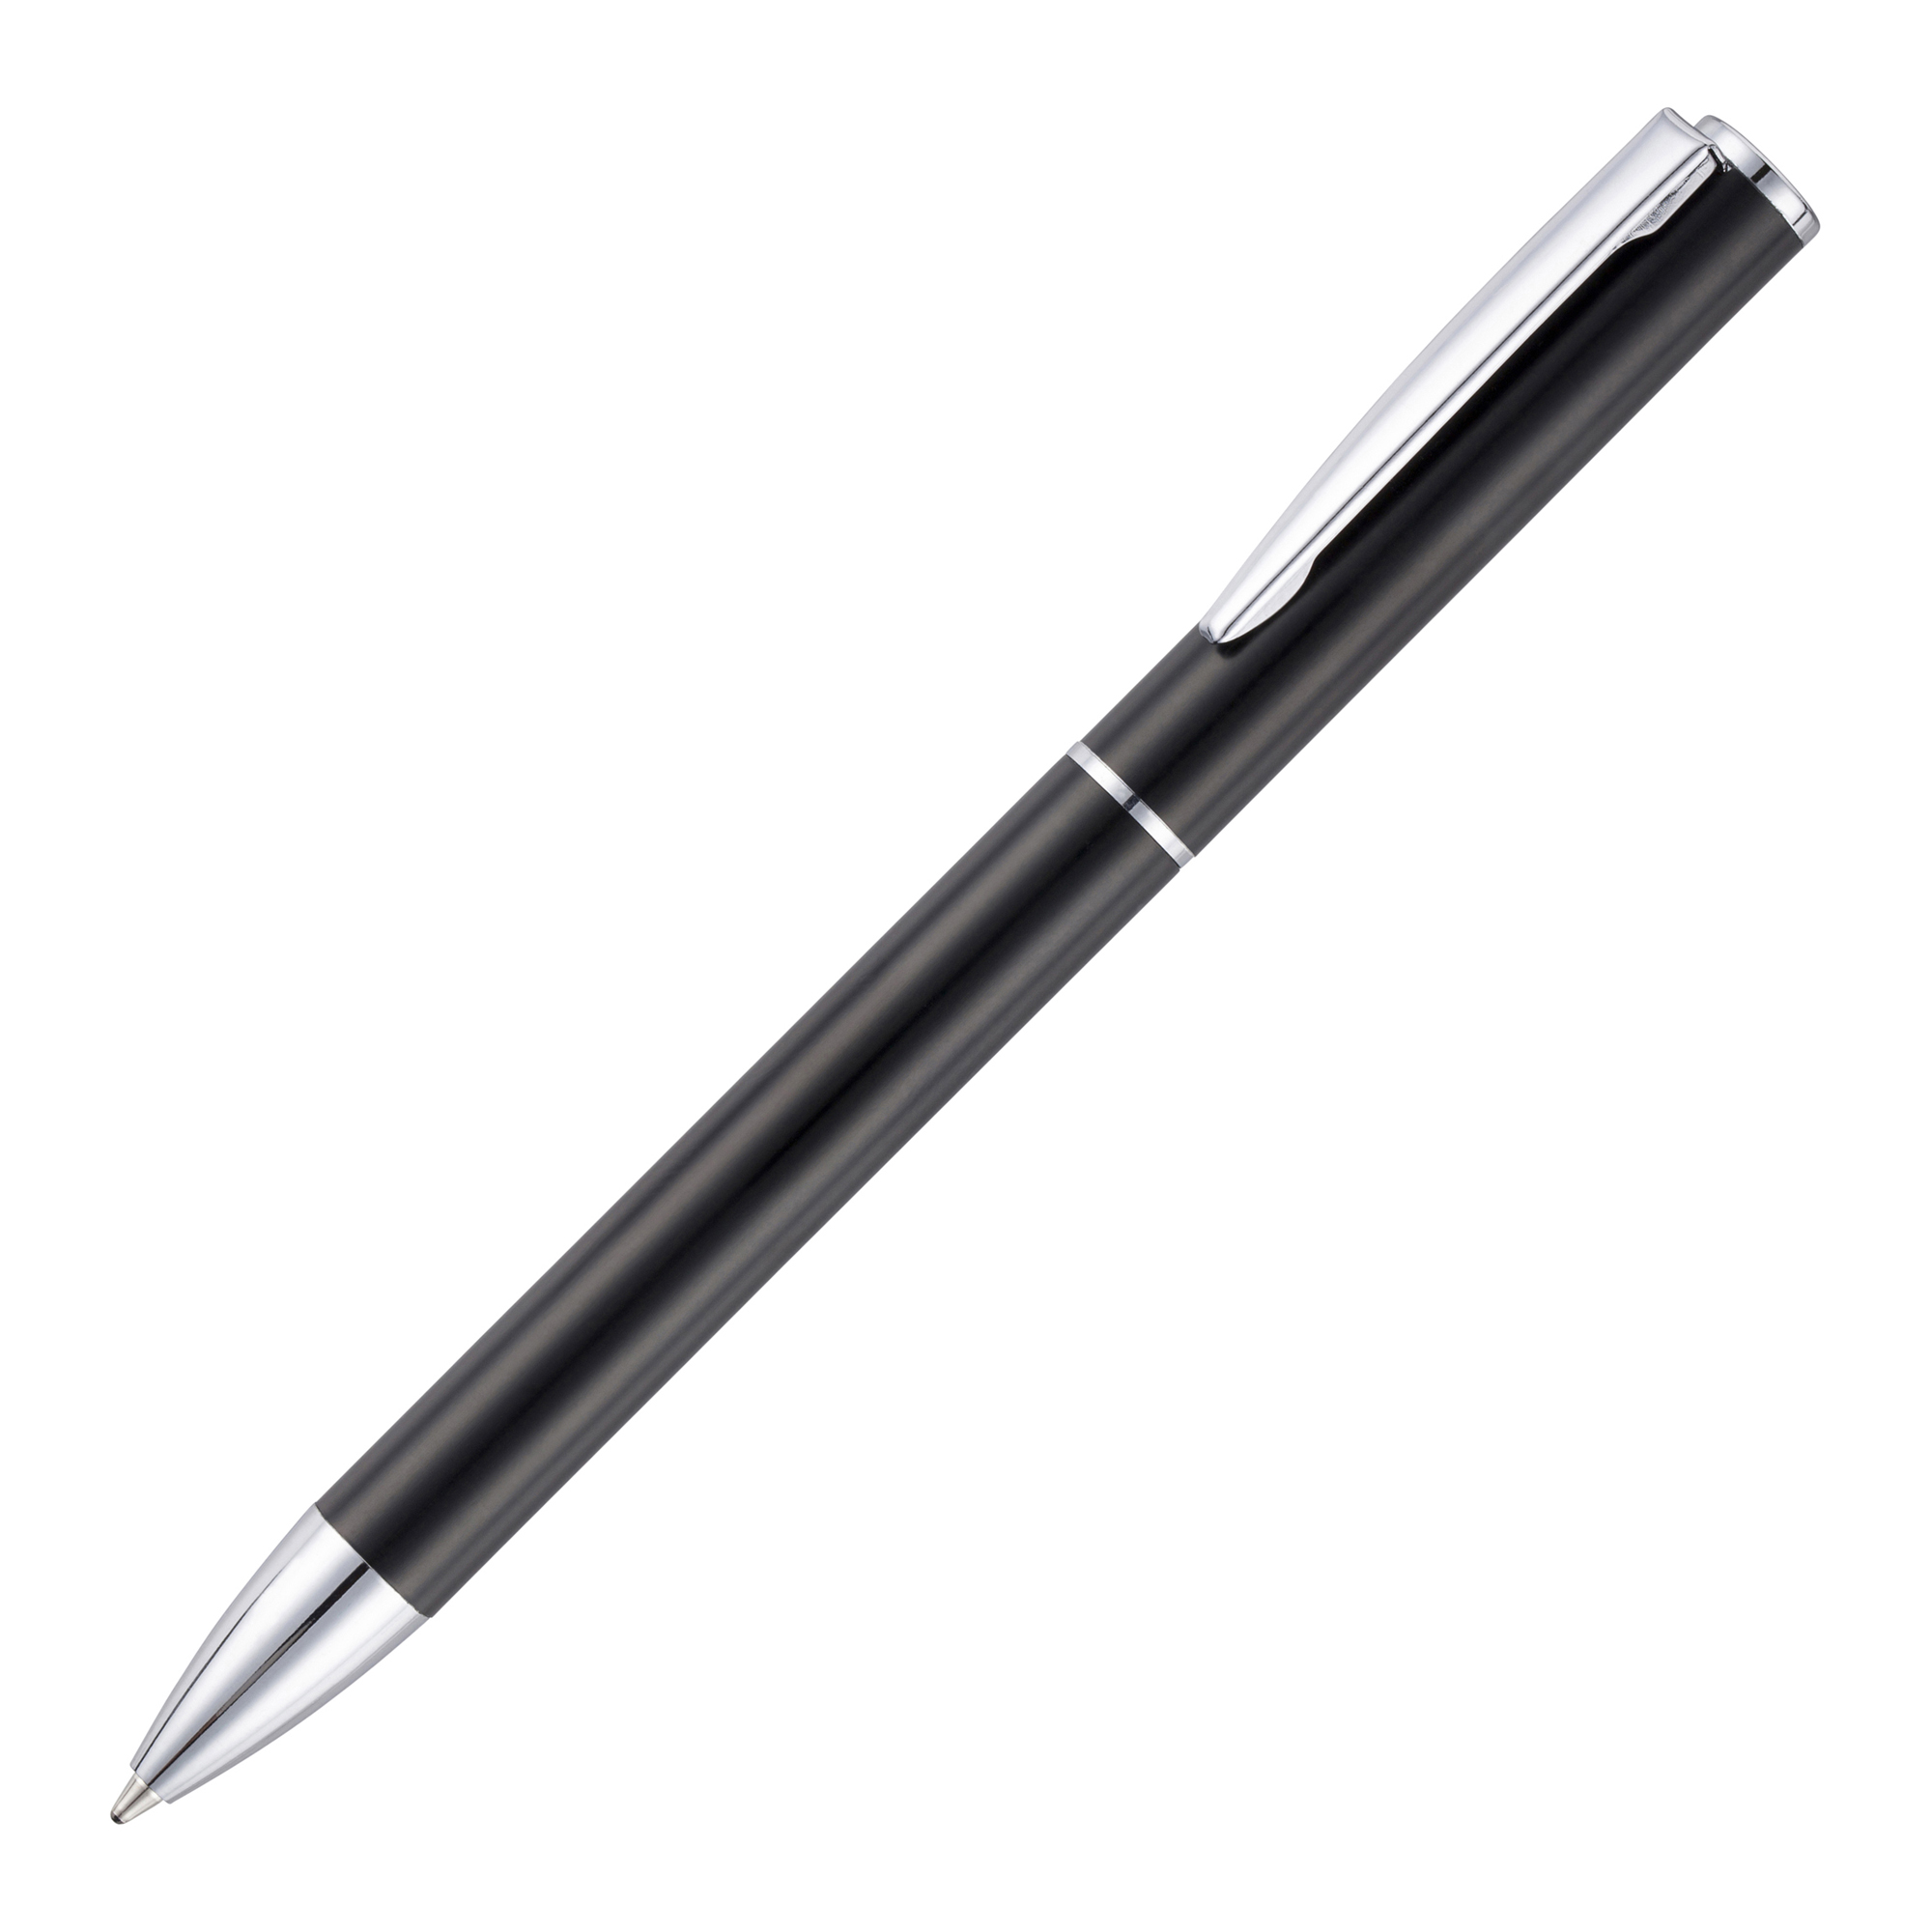 Catesby Twist Action Ball Pen